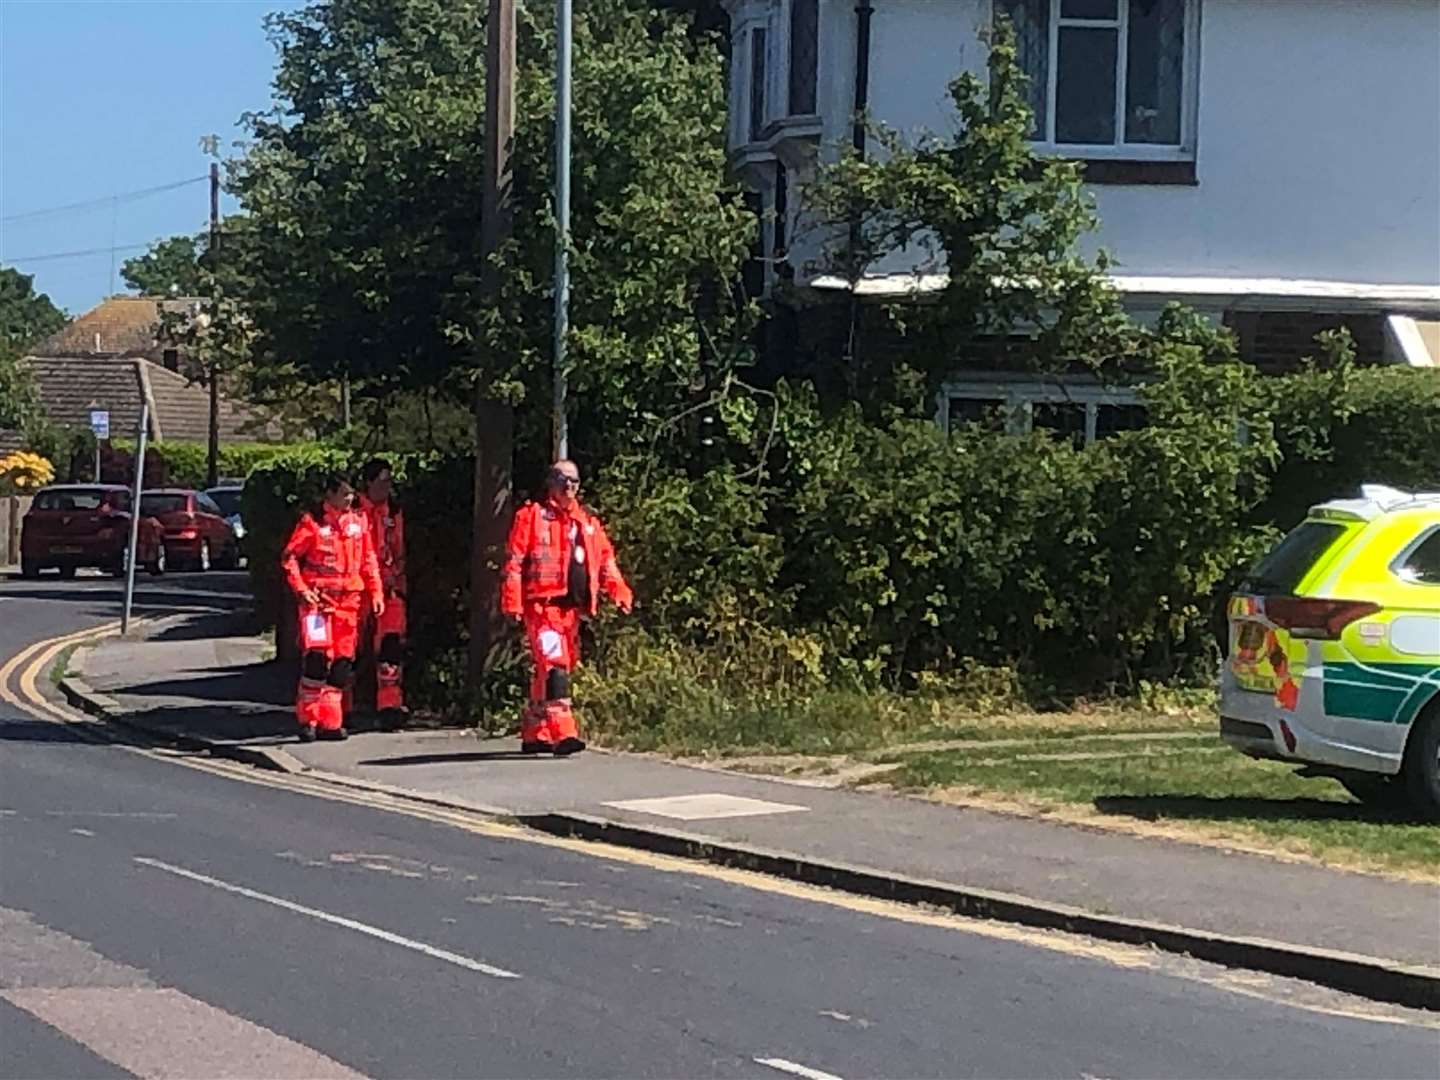 Air ambulance workers were seen nearby. Picture: Joe Coker